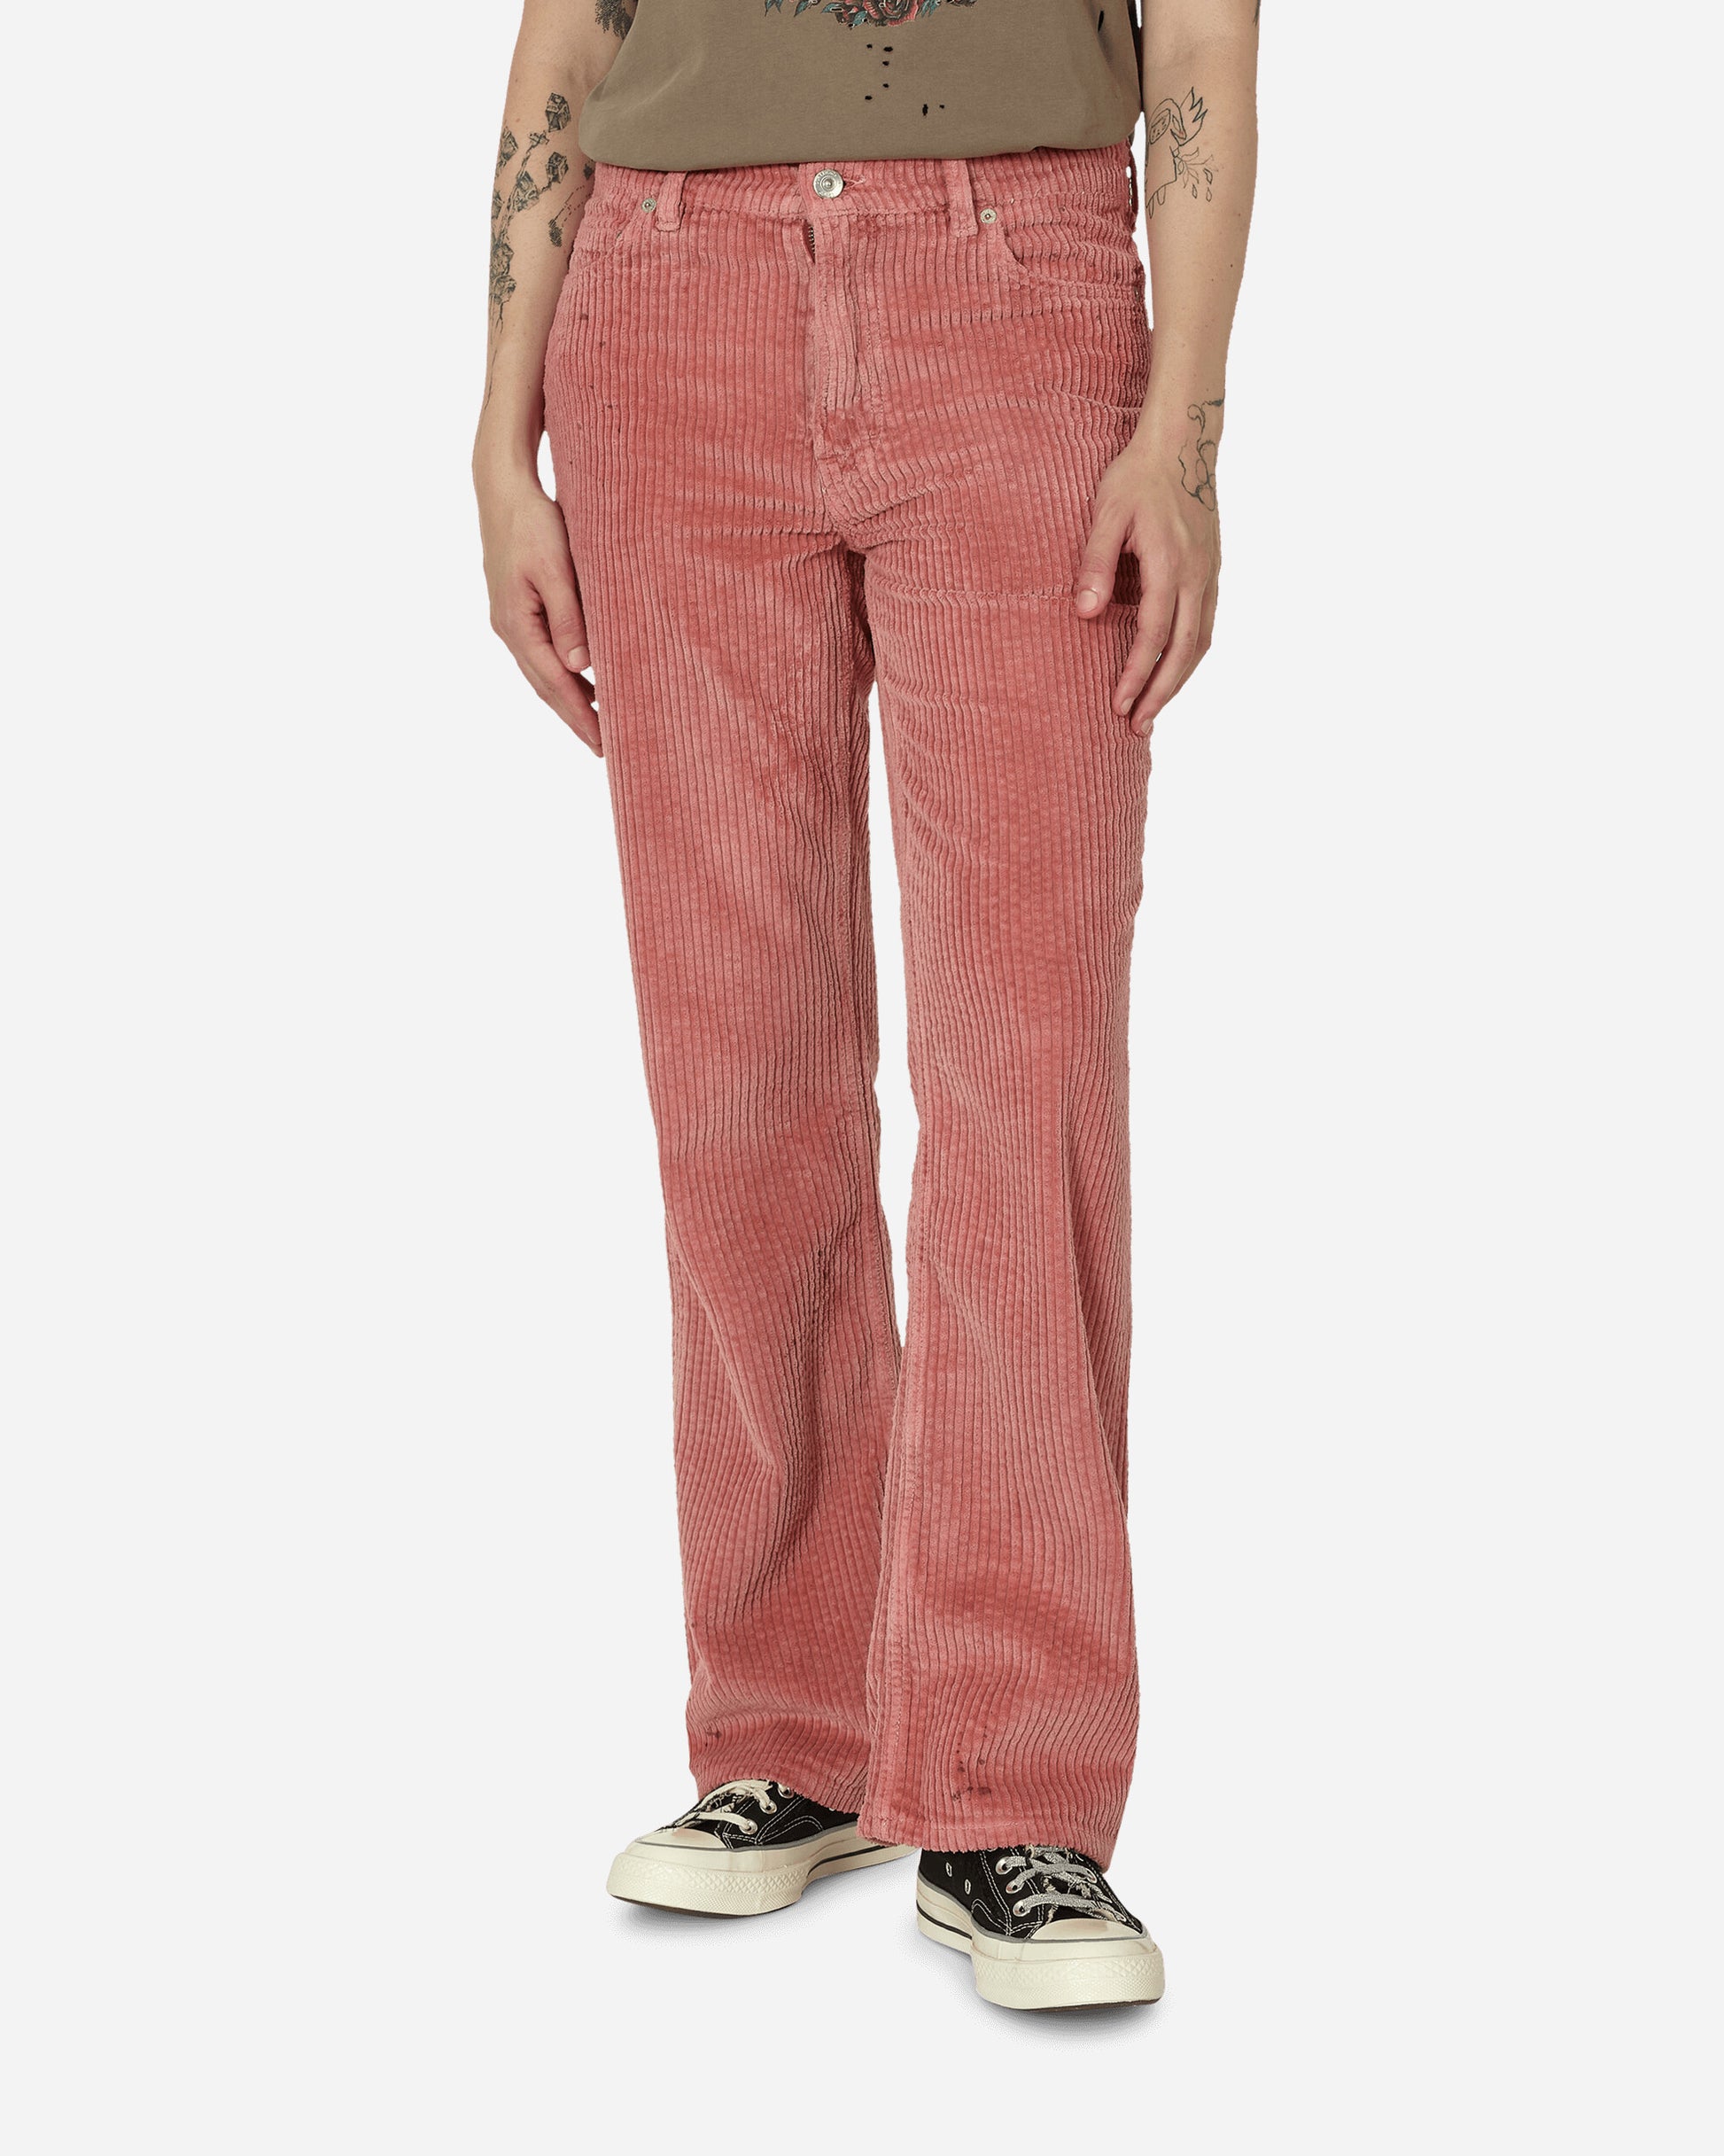 Our Legacy 70S Cut Antique Pink Rustic Cord Pants Trousers M42357A 1